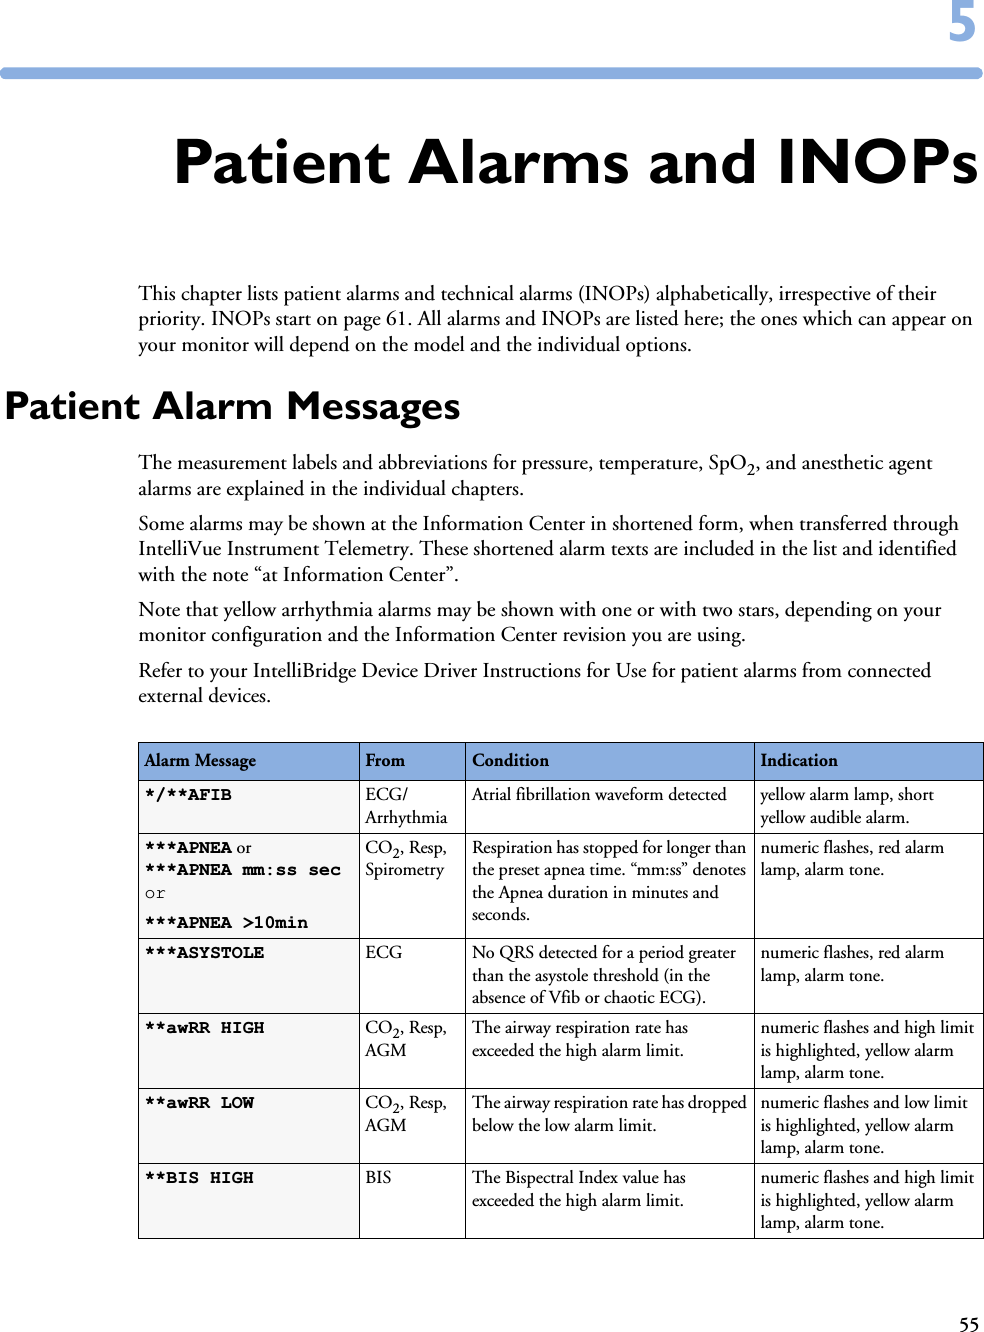 5555Patient Alarms and INOPsThis chapter lists patient alarms and technical alarms (INOPs) alphabetically, irrespective of their priority. INOPs start on page 61. All alarms and INOPs are listed here; the ones which can appear on your monitor will depend on the model and the individual options. Patient Alarm MessagesThe measurement labels and abbreviations for pressure, temperature, SpO2, and anesthetic agent alarms are explained in the individual chapters. Some alarms may be shown at the Information Center in shortened form, when transferred through IntelliVue Instrument Telemetry. These shortened alarm texts are included in the list and identified with the note “at Information Center”.Note that yellow arrhythmia alarms may be shown with one or with two stars, depending on your monitor configuration and the Information Center revision you are using.Refer to your IntelliBridge Device Driver Instructions for Use for patient alarms from connected external devices. Alarm Message From Condition Indication*/**AFIB ECG/ArrhythmiaAtrial fibrillation waveform detected yellow alarm lamp, short yellow audible alarm.***APNEA or***APNEA mm:ss sec or***APNEA &gt;10minCO2, Resp, SpirometryRespiration has stopped for longer than the preset apnea time. “mm:ss” denotes the Apnea duration in minutes and seconds. numeric flashes, red alarm lamp, alarm tone. ***ASYSTOLE ECG No QRS detected for a period greater than the asystole threshold (in the absence of Vfib or chaotic ECG).numeric flashes, red alarm lamp, alarm tone.**awRR HIGH CO2, Resp, AGMThe airway respiration rate has exceeded the high alarm limit.numeric flashes and high limit is highlighted, yellow alarm lamp, alarm tone.**awRR LOW CO2, Resp, AGMThe airway respiration rate has dropped below the low alarm limit.numeric flashes and low limit is highlighted, yellow alarm lamp, alarm tone.**BIS HIGH BIS The Bispectral Index value has exceeded the high alarm limit.numeric flashes and high limit is highlighted, yellow alarm lamp, alarm tone.